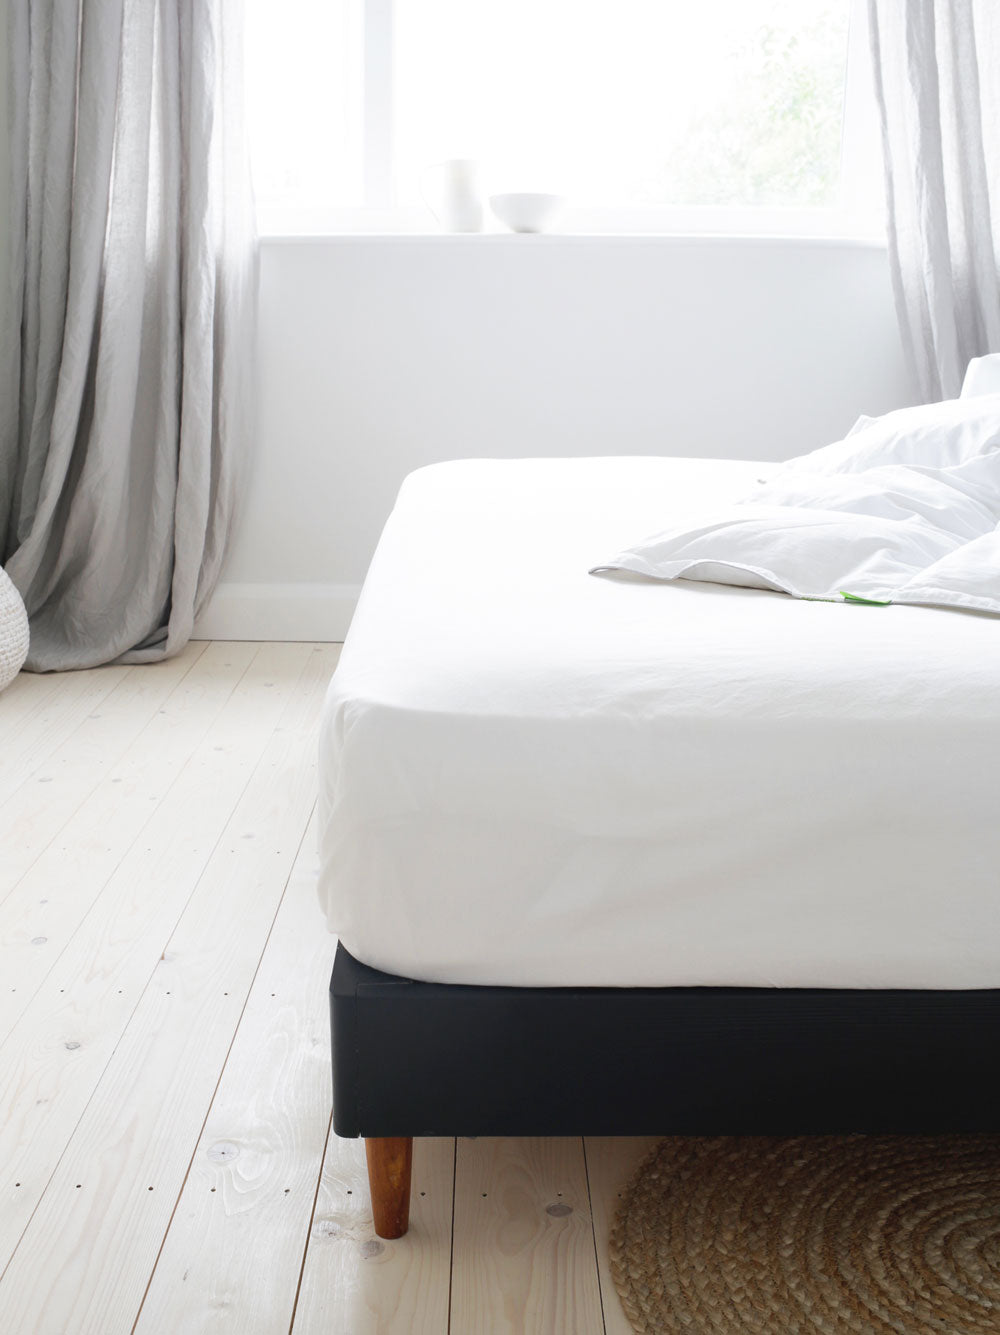 How Often to Replace Sheets, Pillows and Other Bed Linens